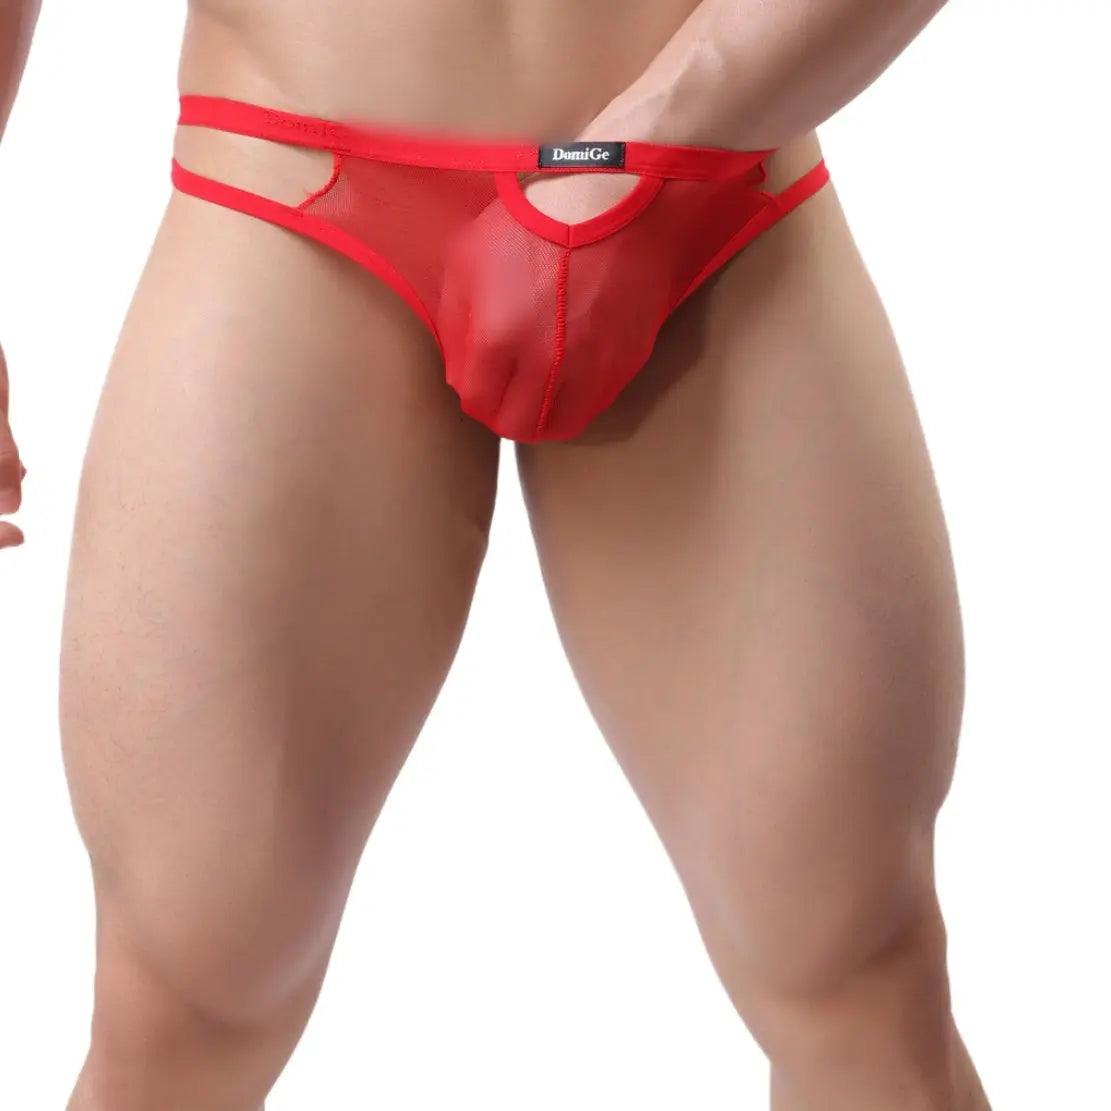 Men's Underwear with Elastic Waistband and Hollow Design G-String - His Inwear